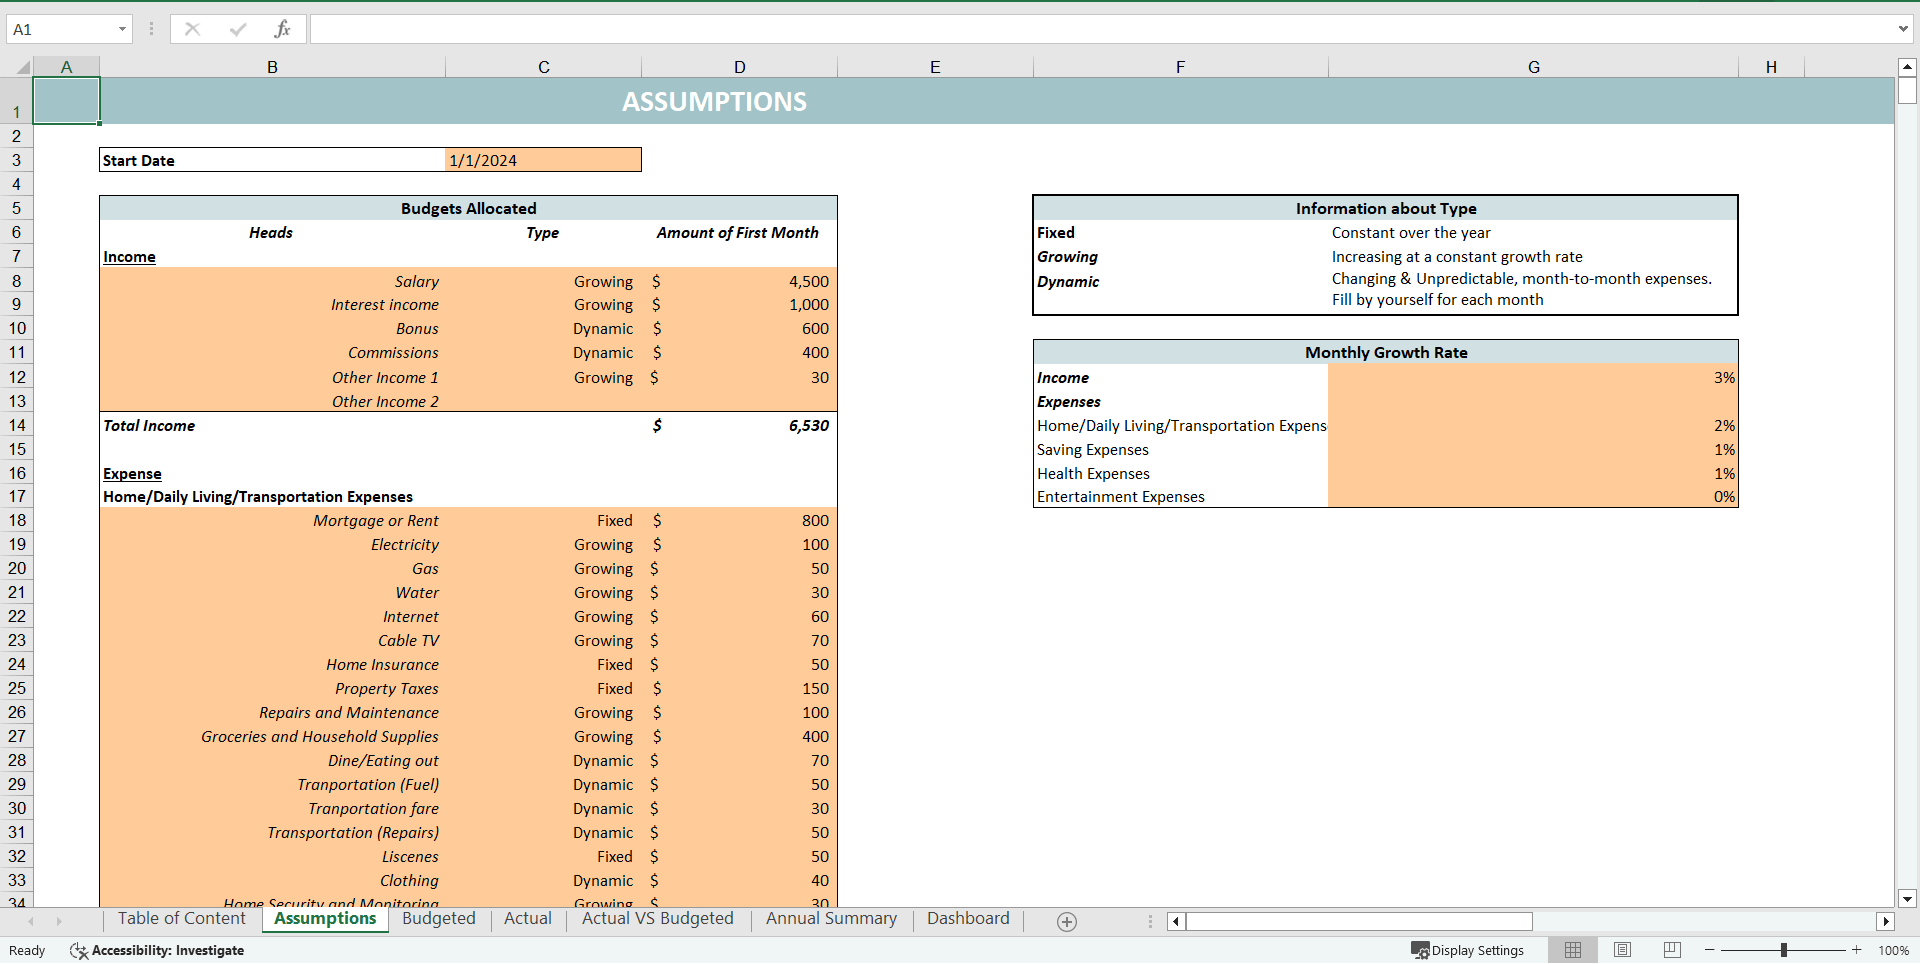 Yearly Budget Planner Template